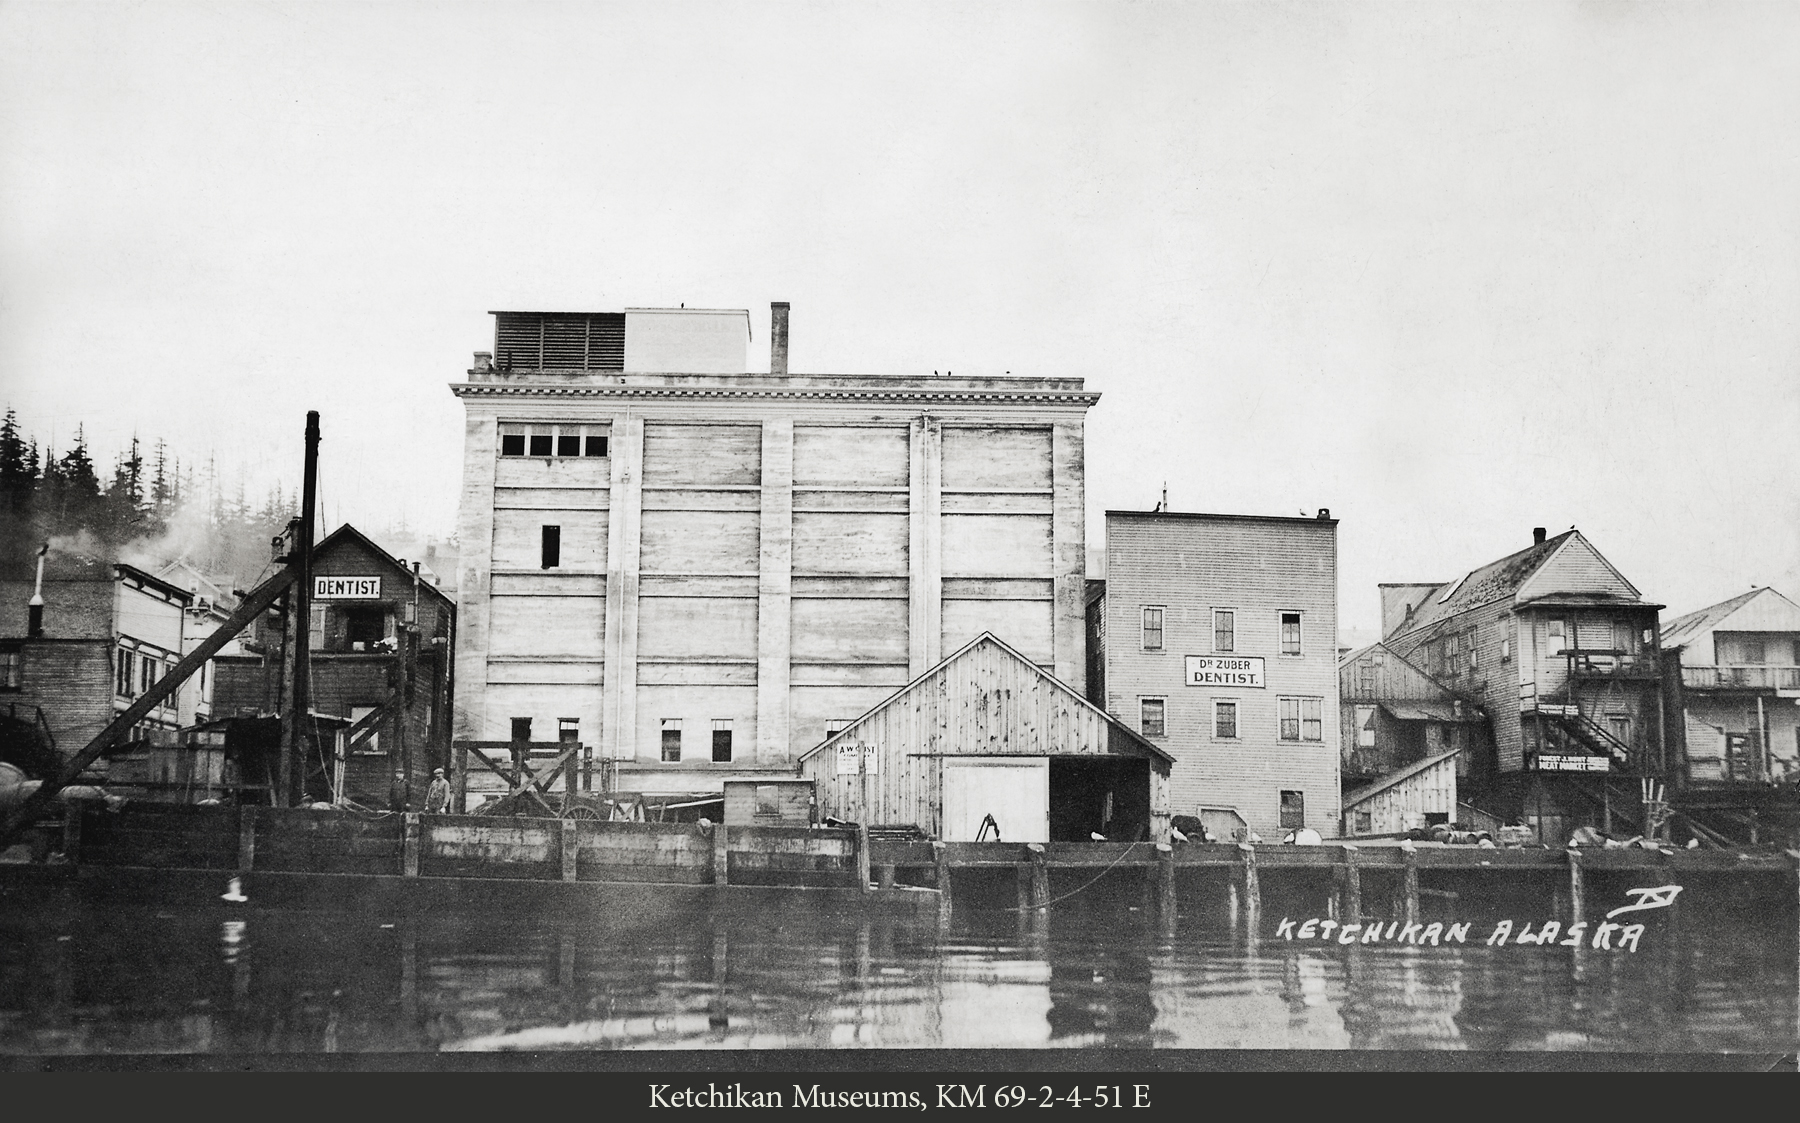 Waterfront view of Cold Storage, Dr. Zuber's Dentist Office, and the Hunt Building, 1914